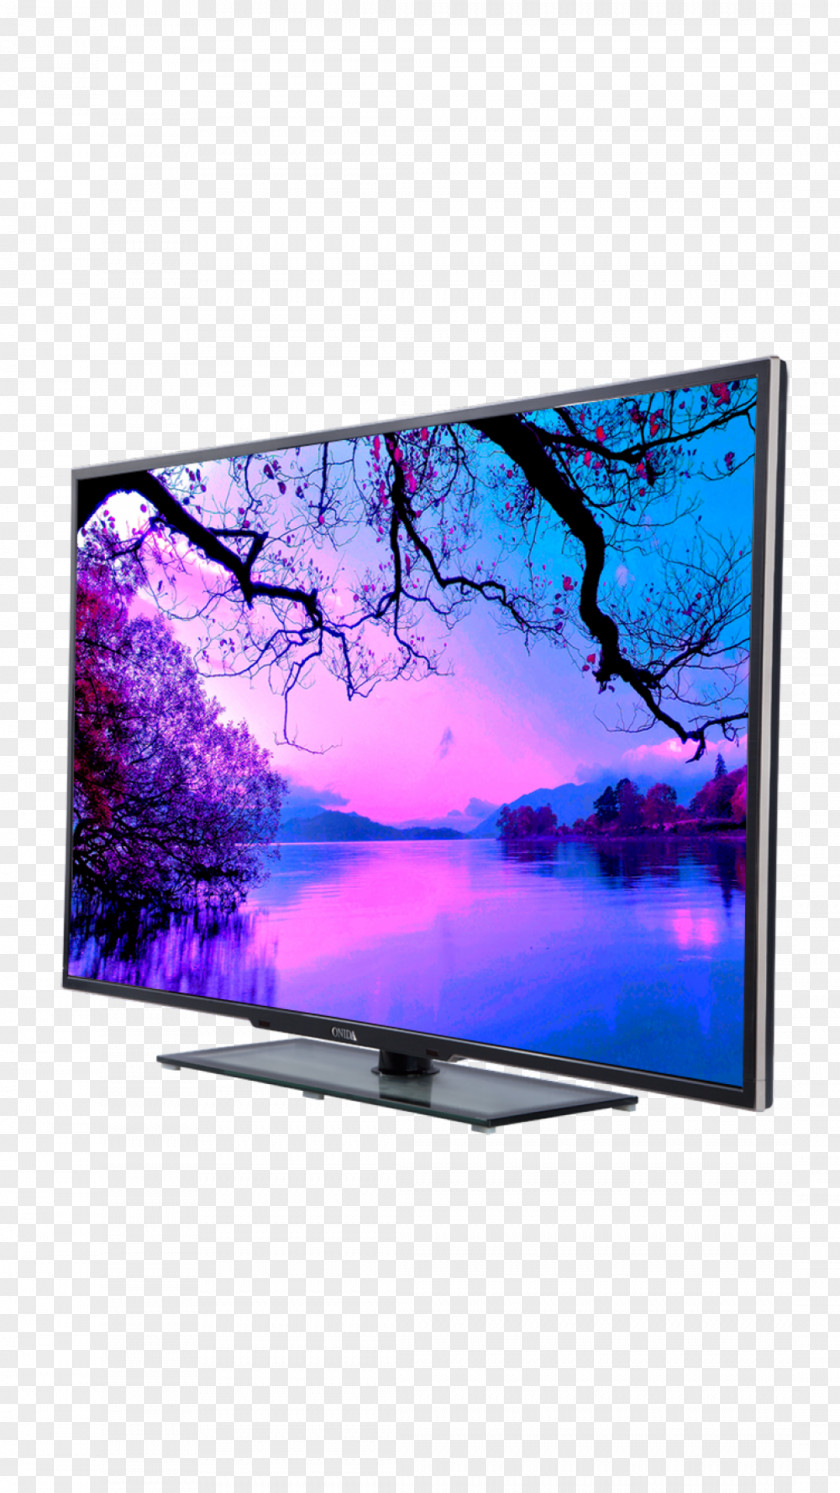 Tv Television Set Display Device LCD Flat Panel PNG